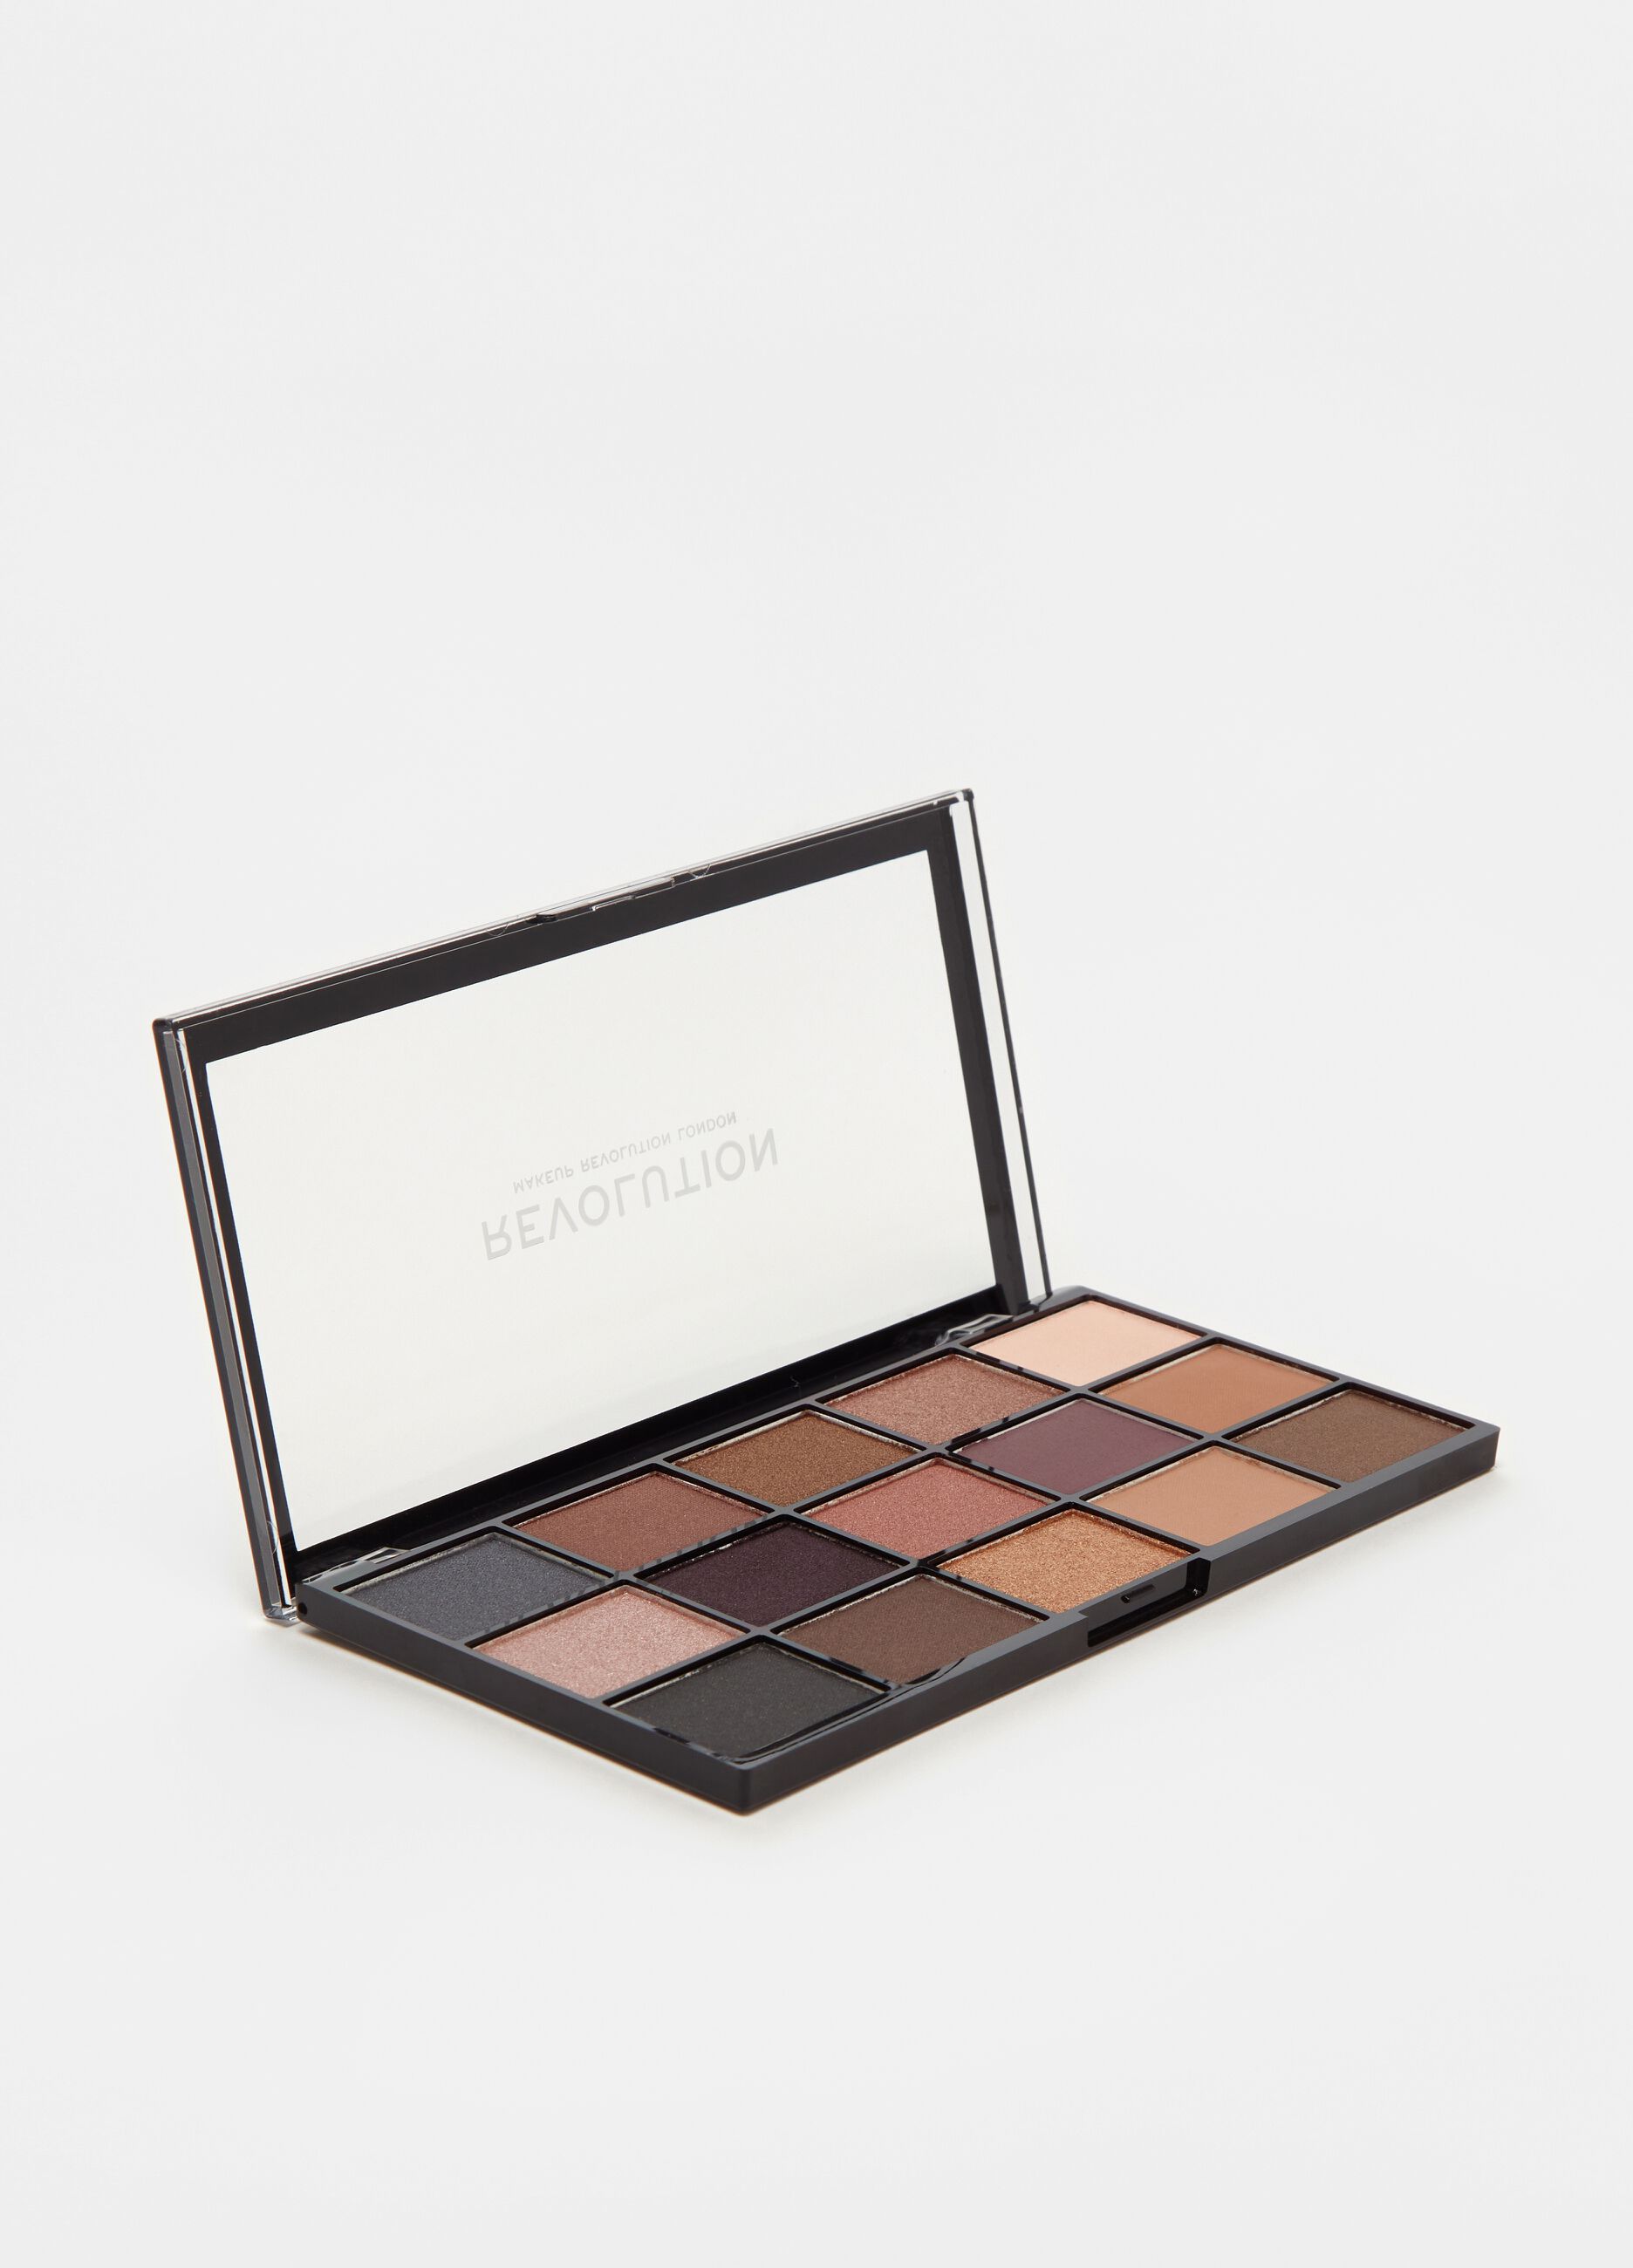 Reloaded Palette Iconic 1.0